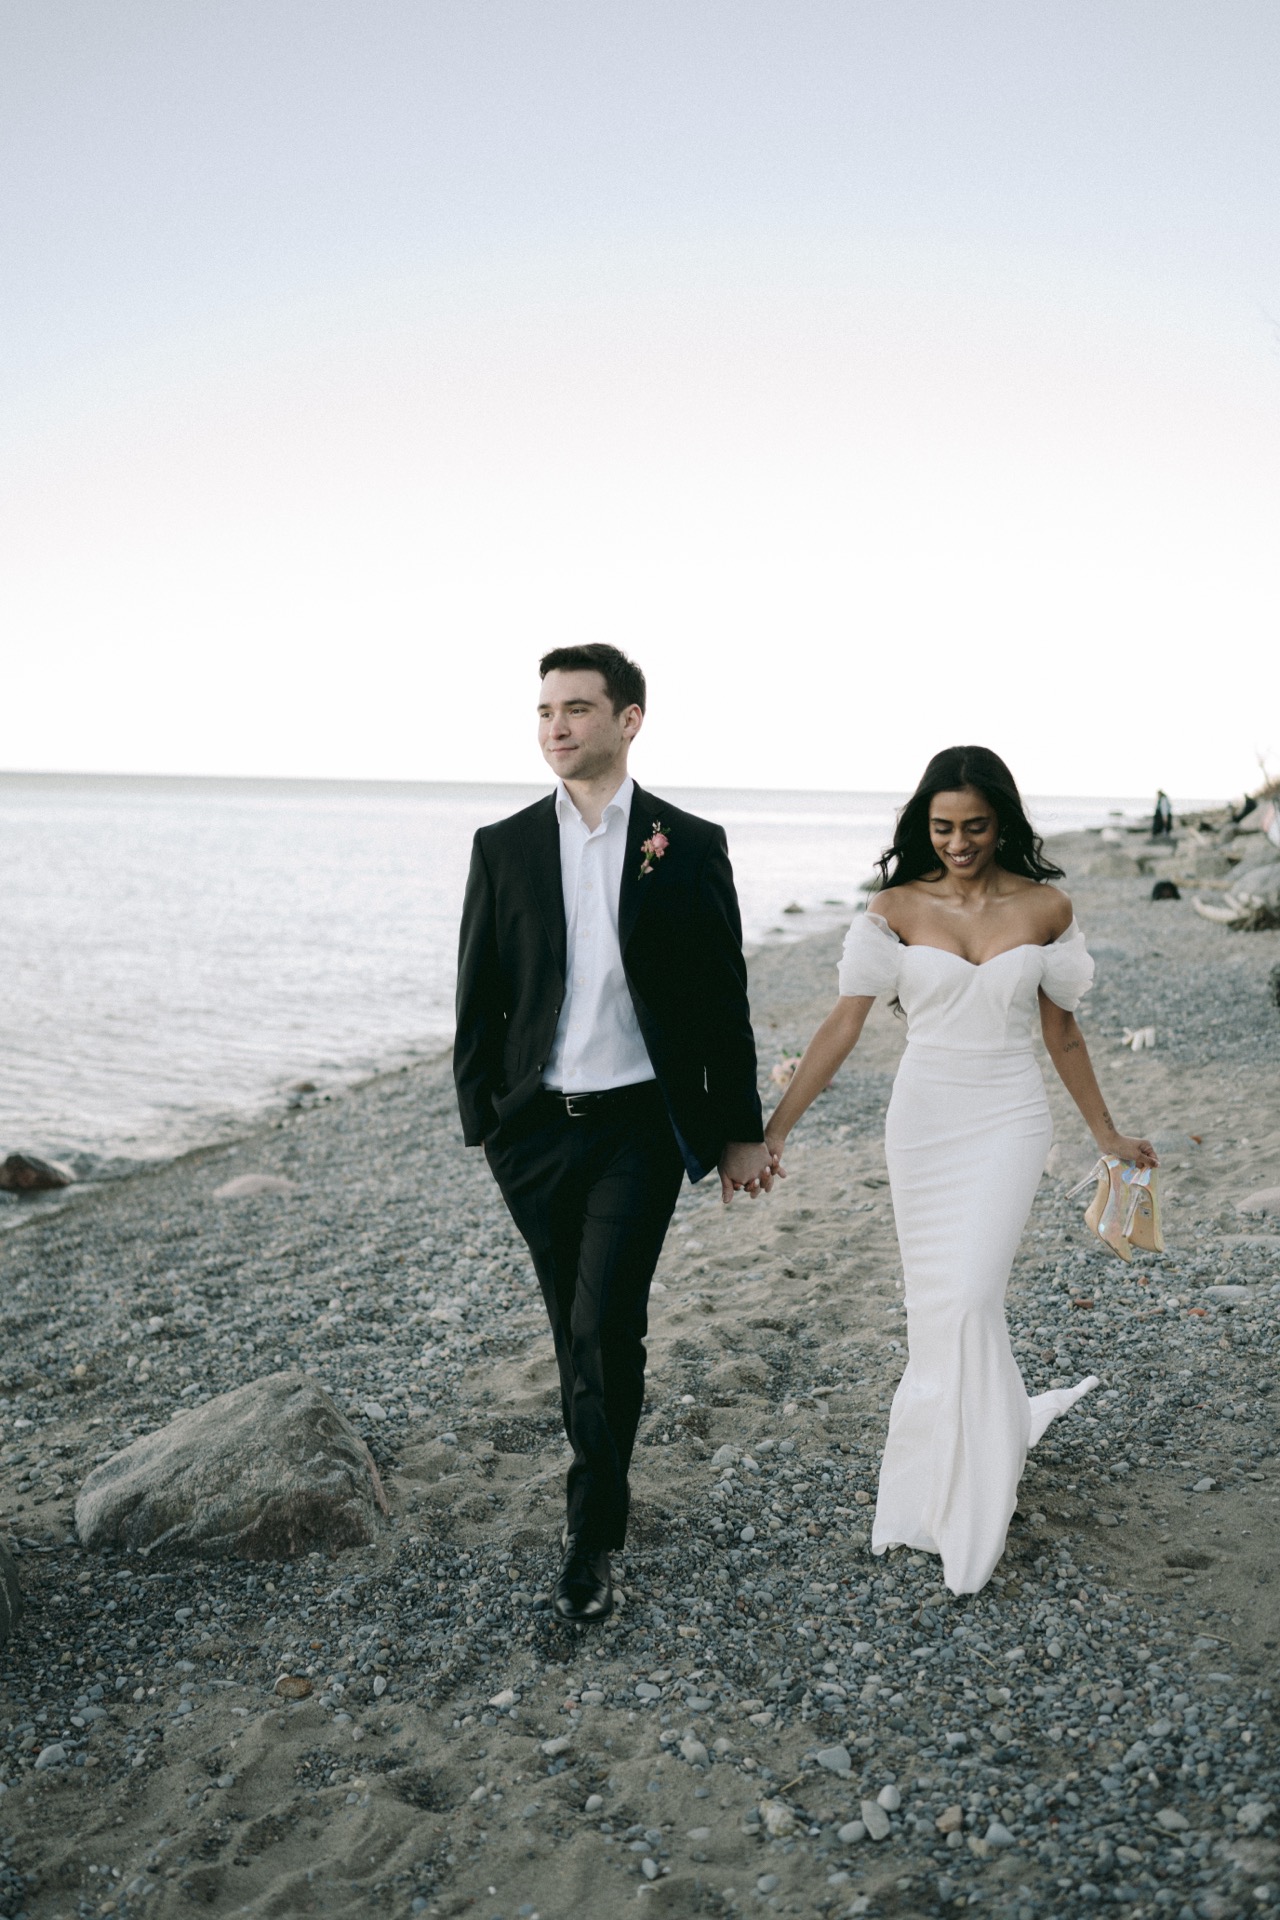 The newlywed enjoy the walk during golden hour after their wedding ceremony by Lake Ontario.